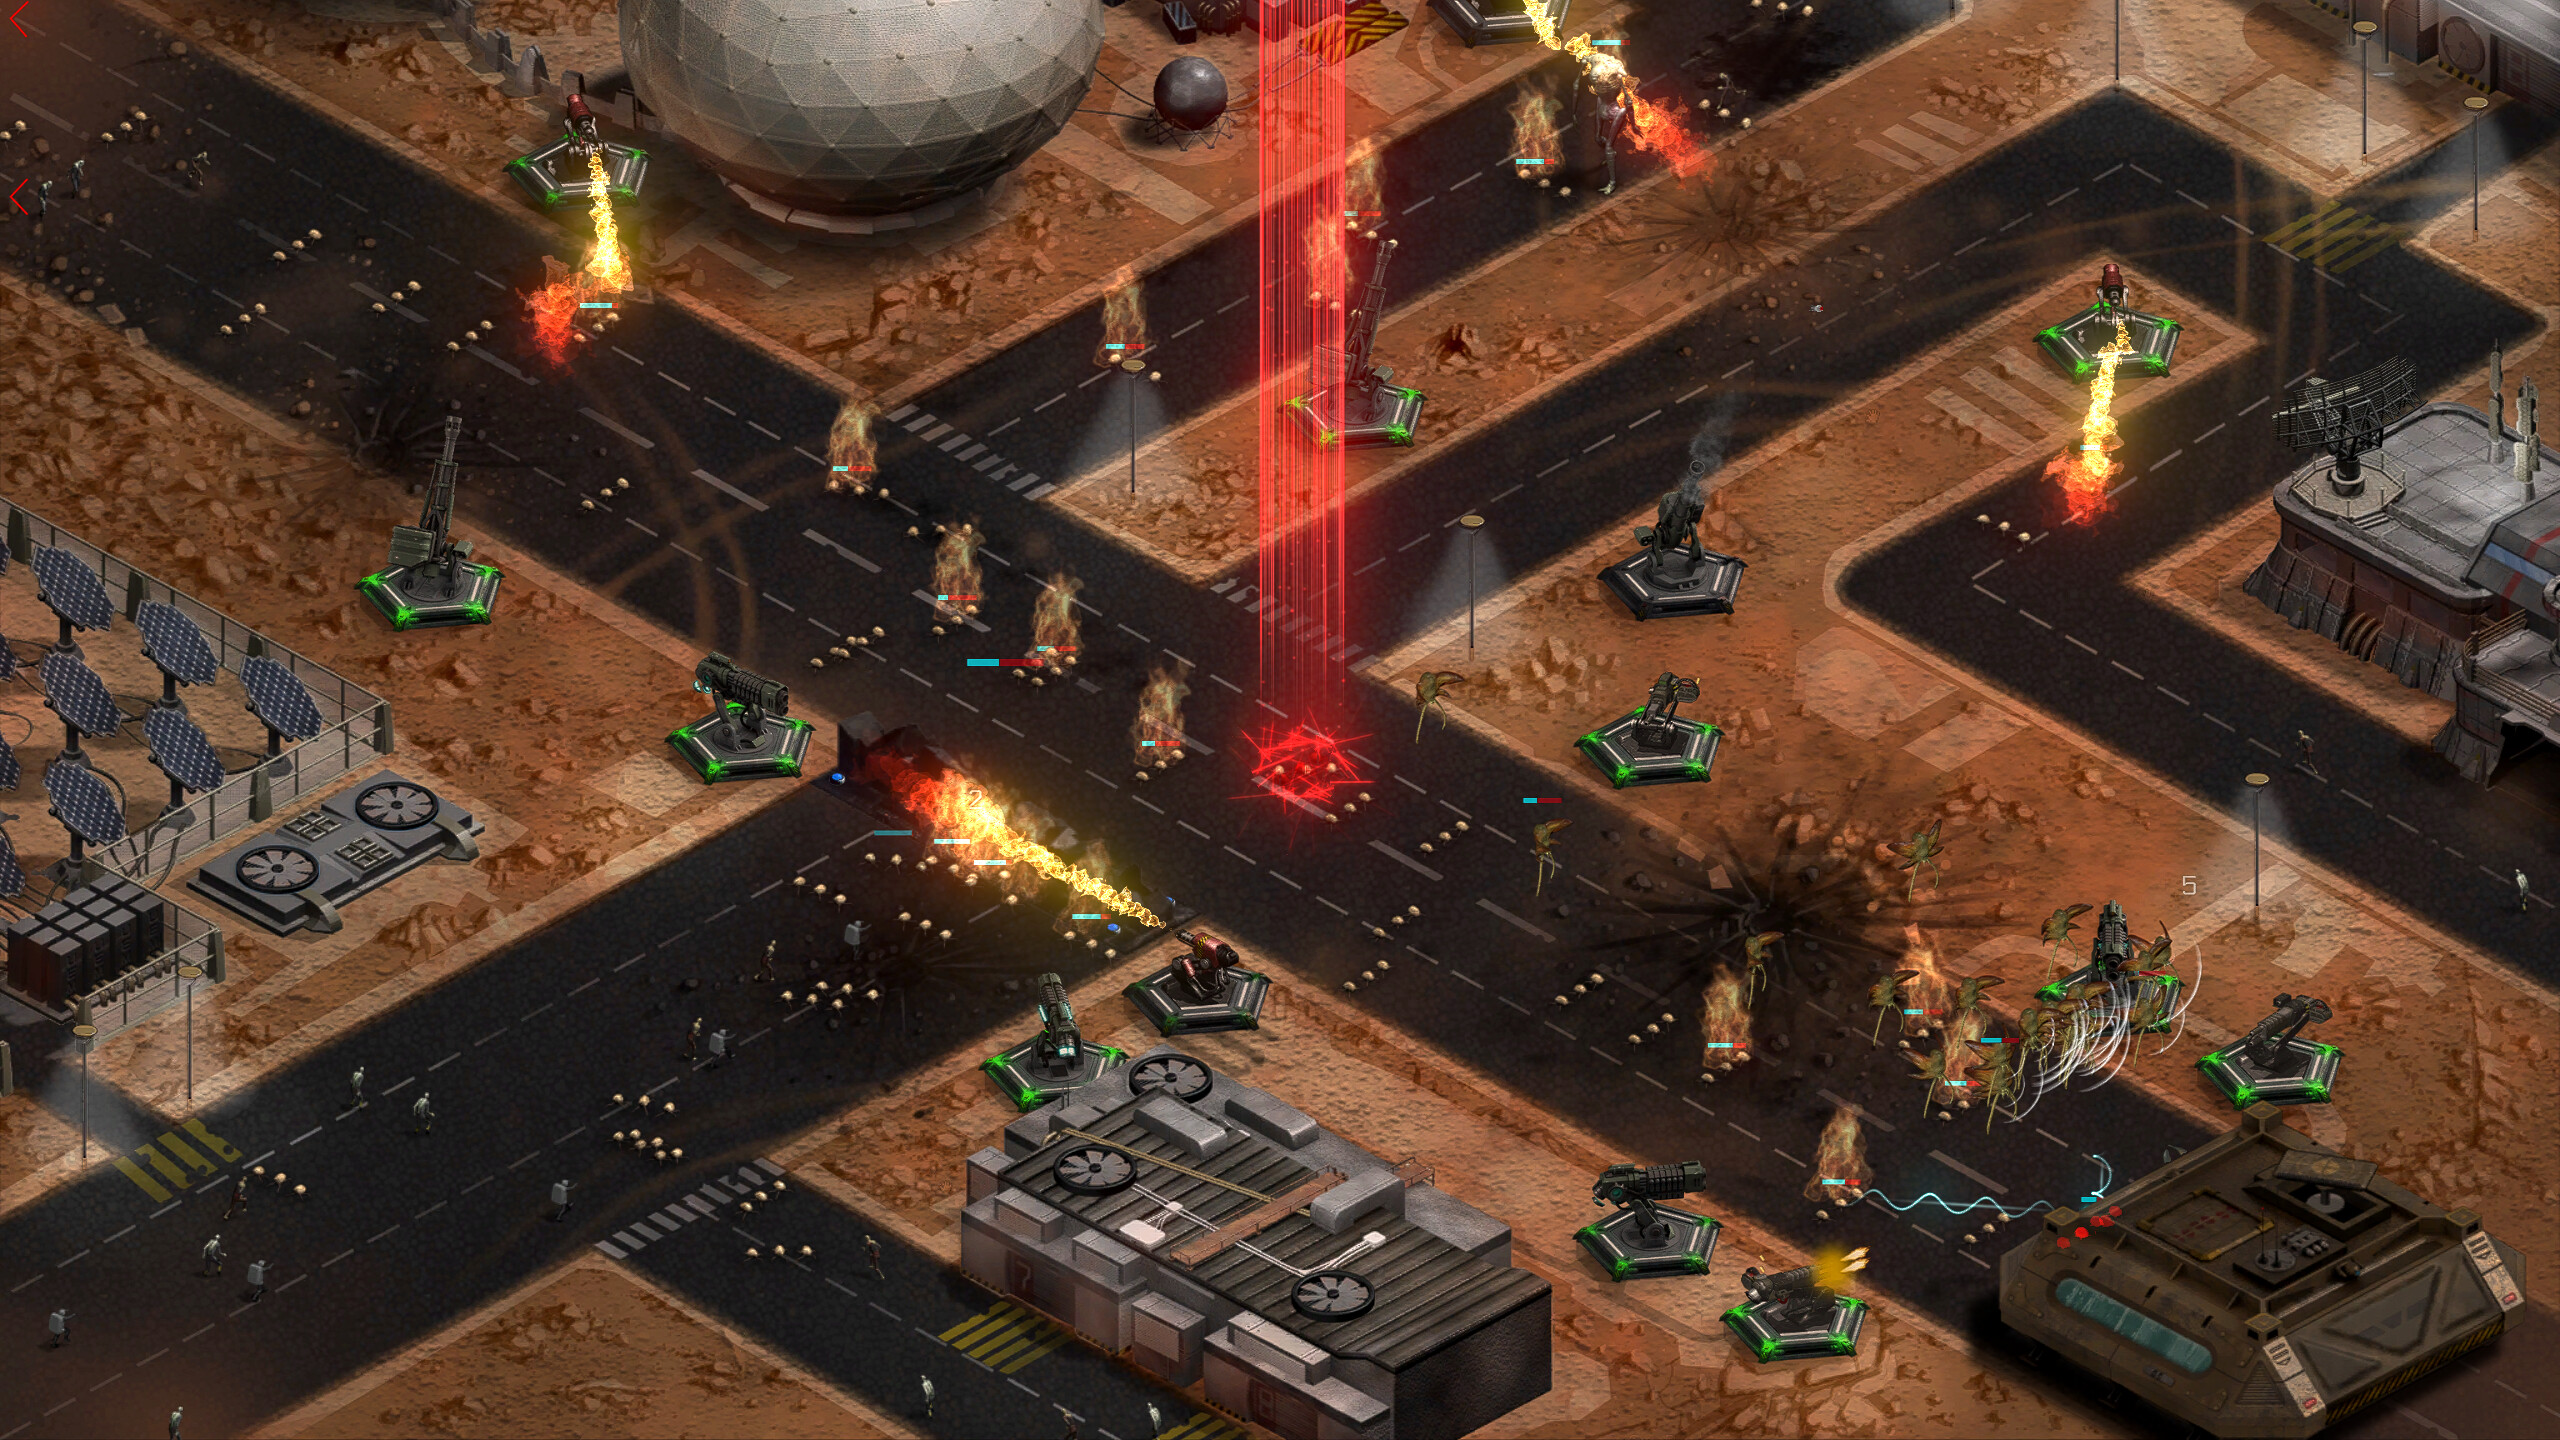 2112TD: Tower Defense Survival Free Download for PC